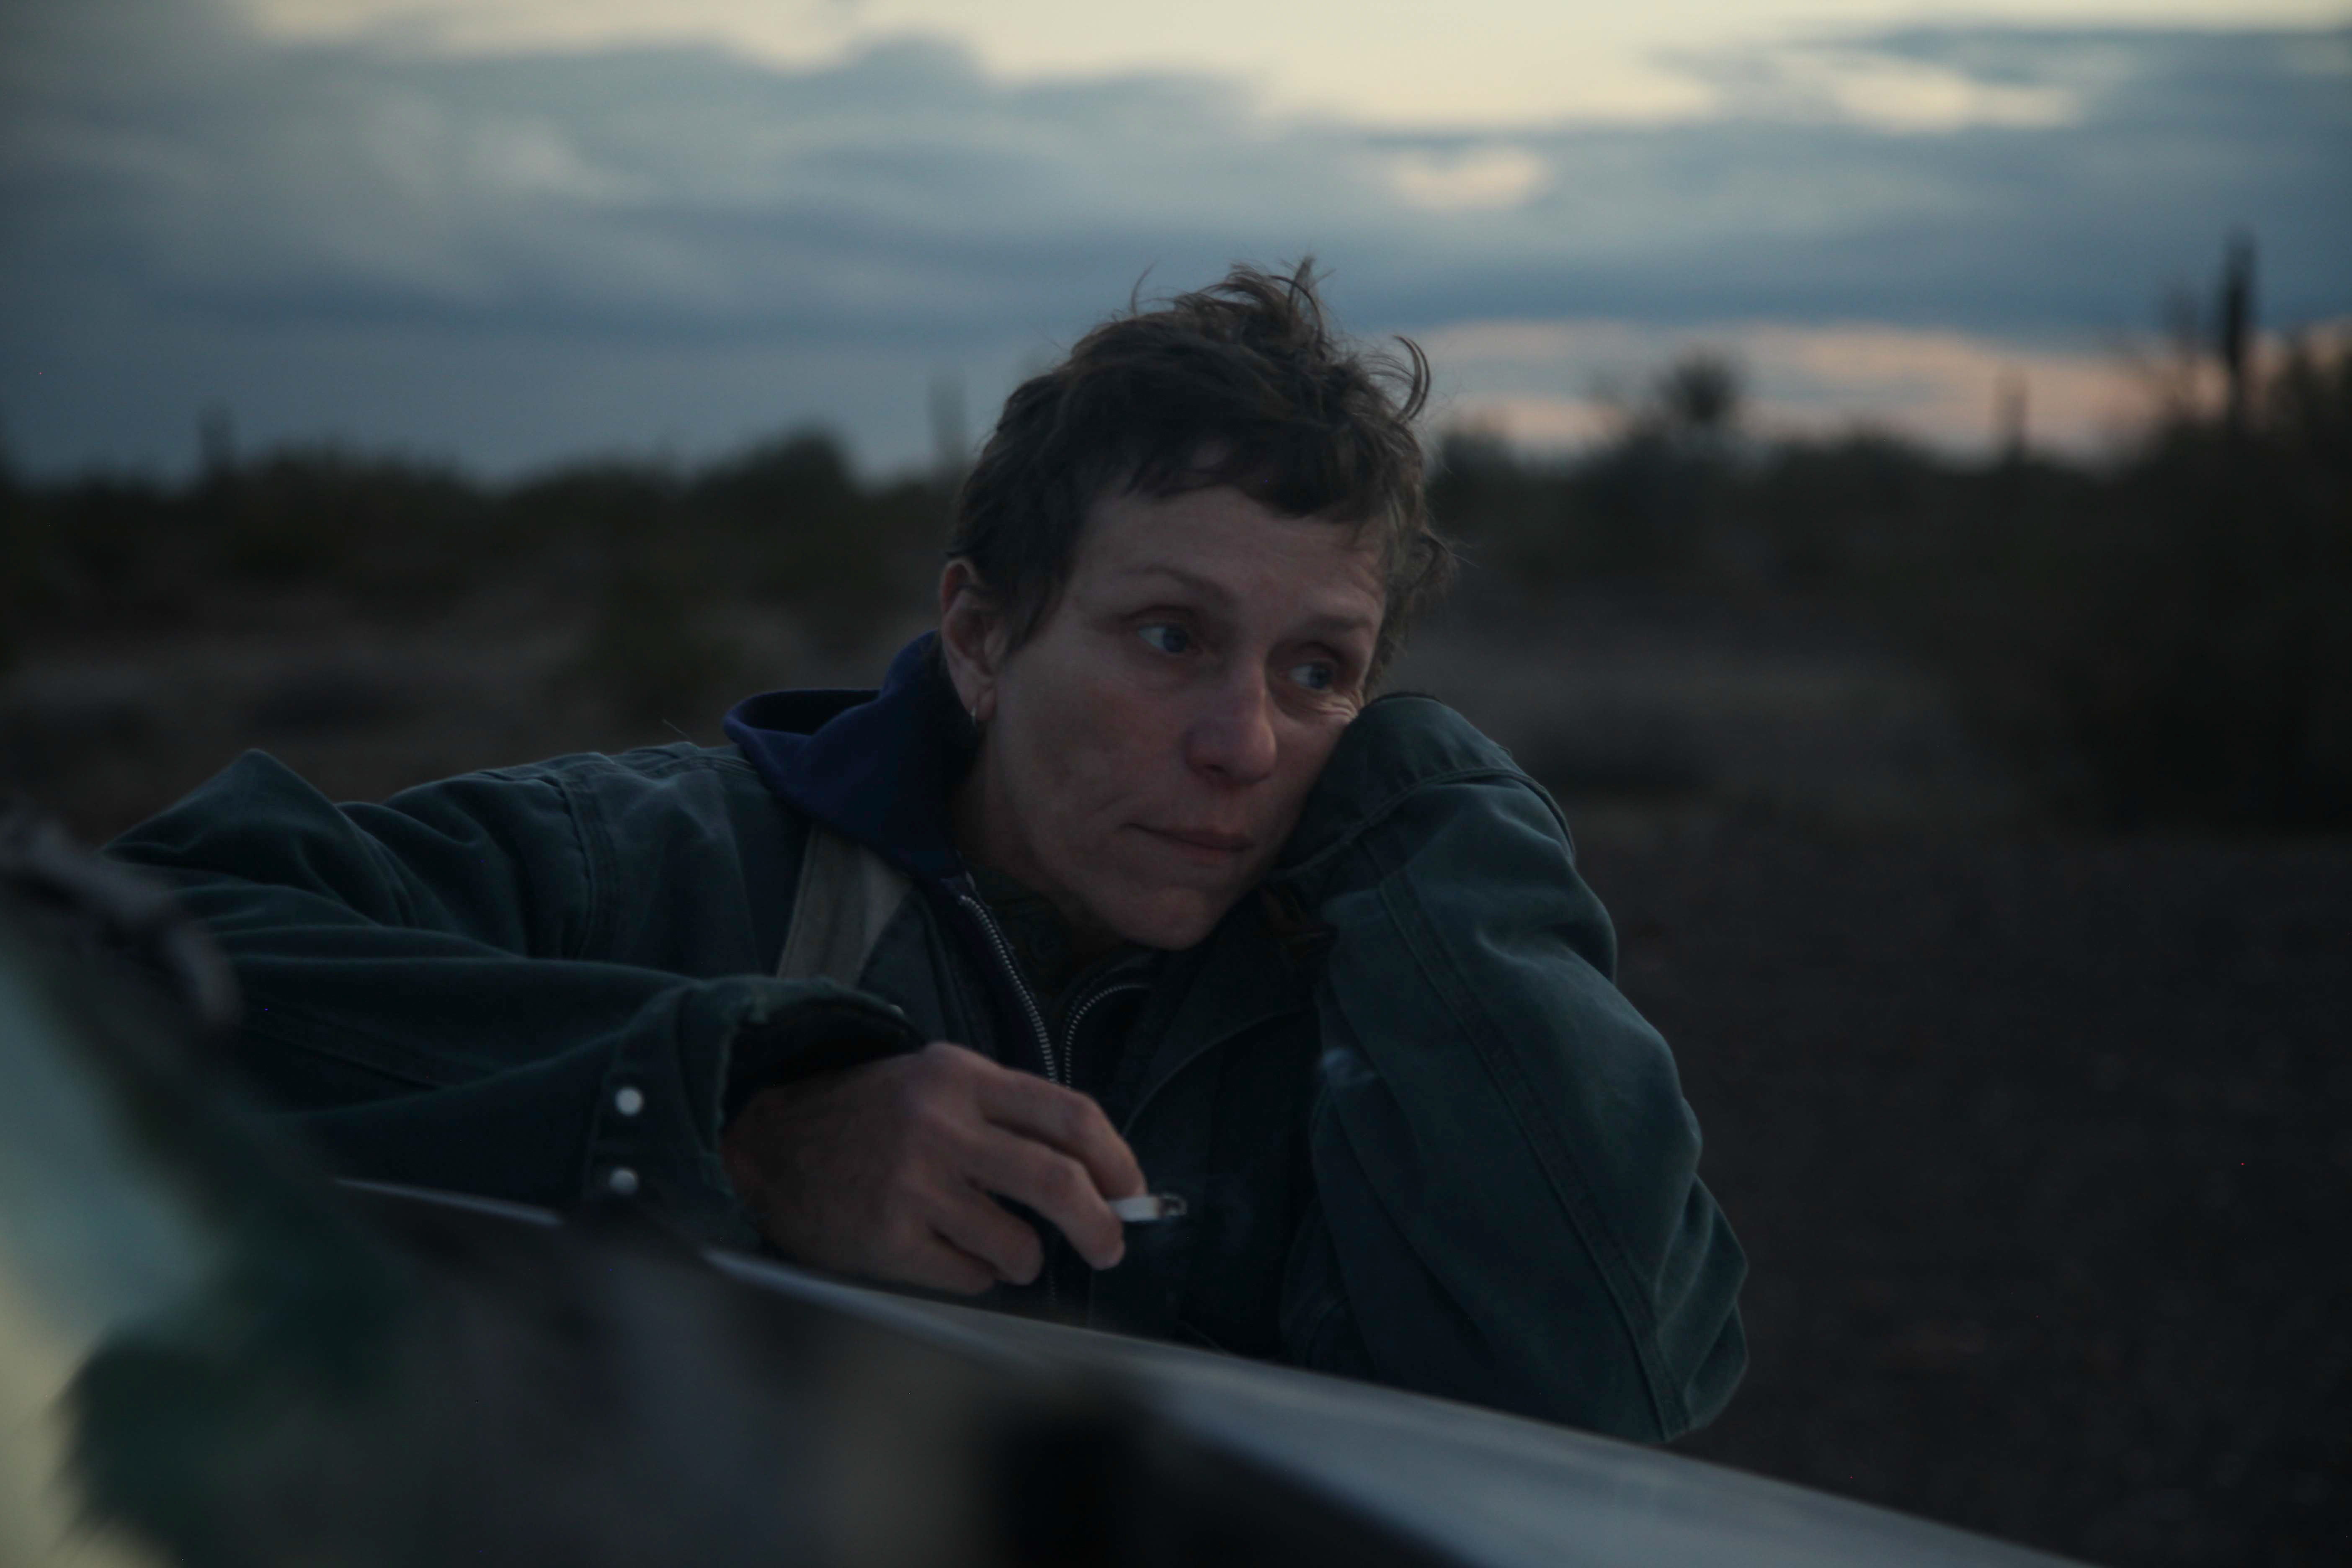 Frances McDormand as Fern in Nomadland (Joshua James Richards/Searchlight Pictures/20th Century Studios)